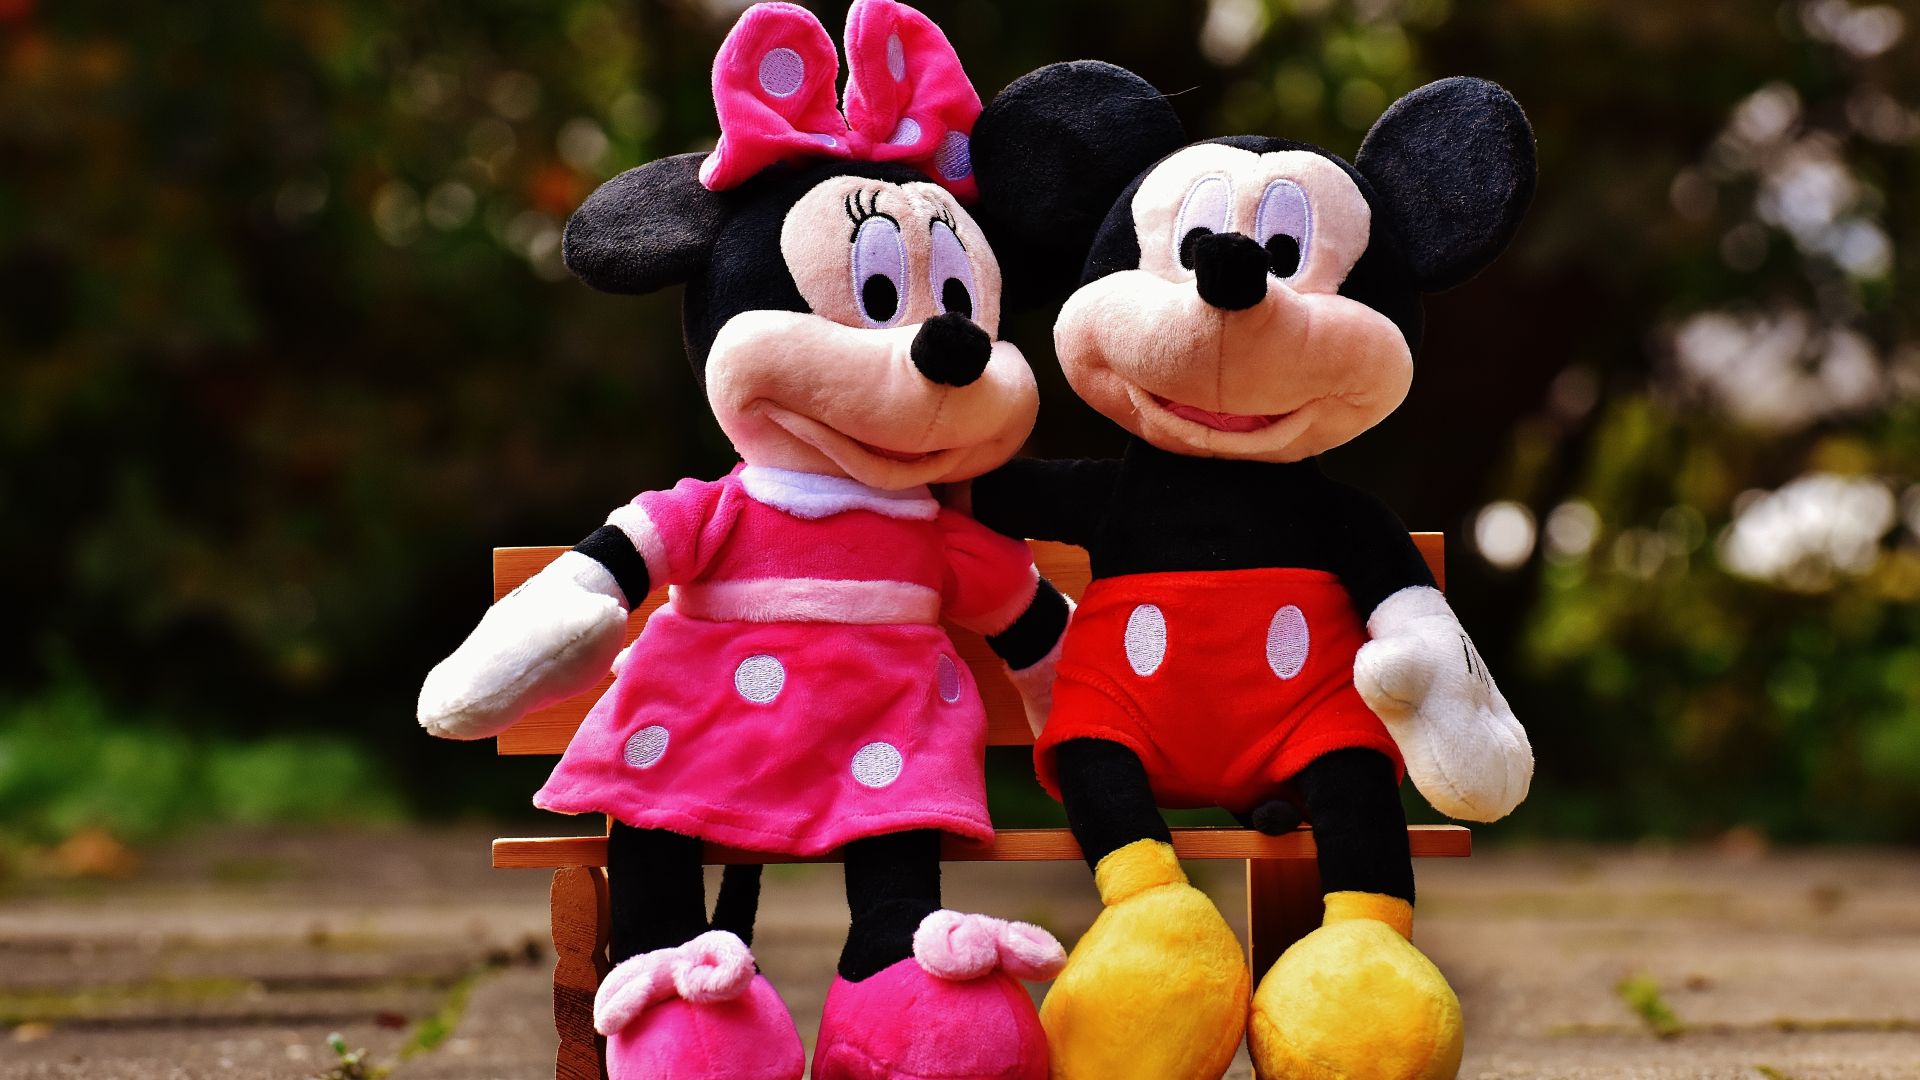 Desktop Wallpaper Mickey Mouse And Minnie Mouse Toys, Hd Image, Picture,  Background, Ijxxds